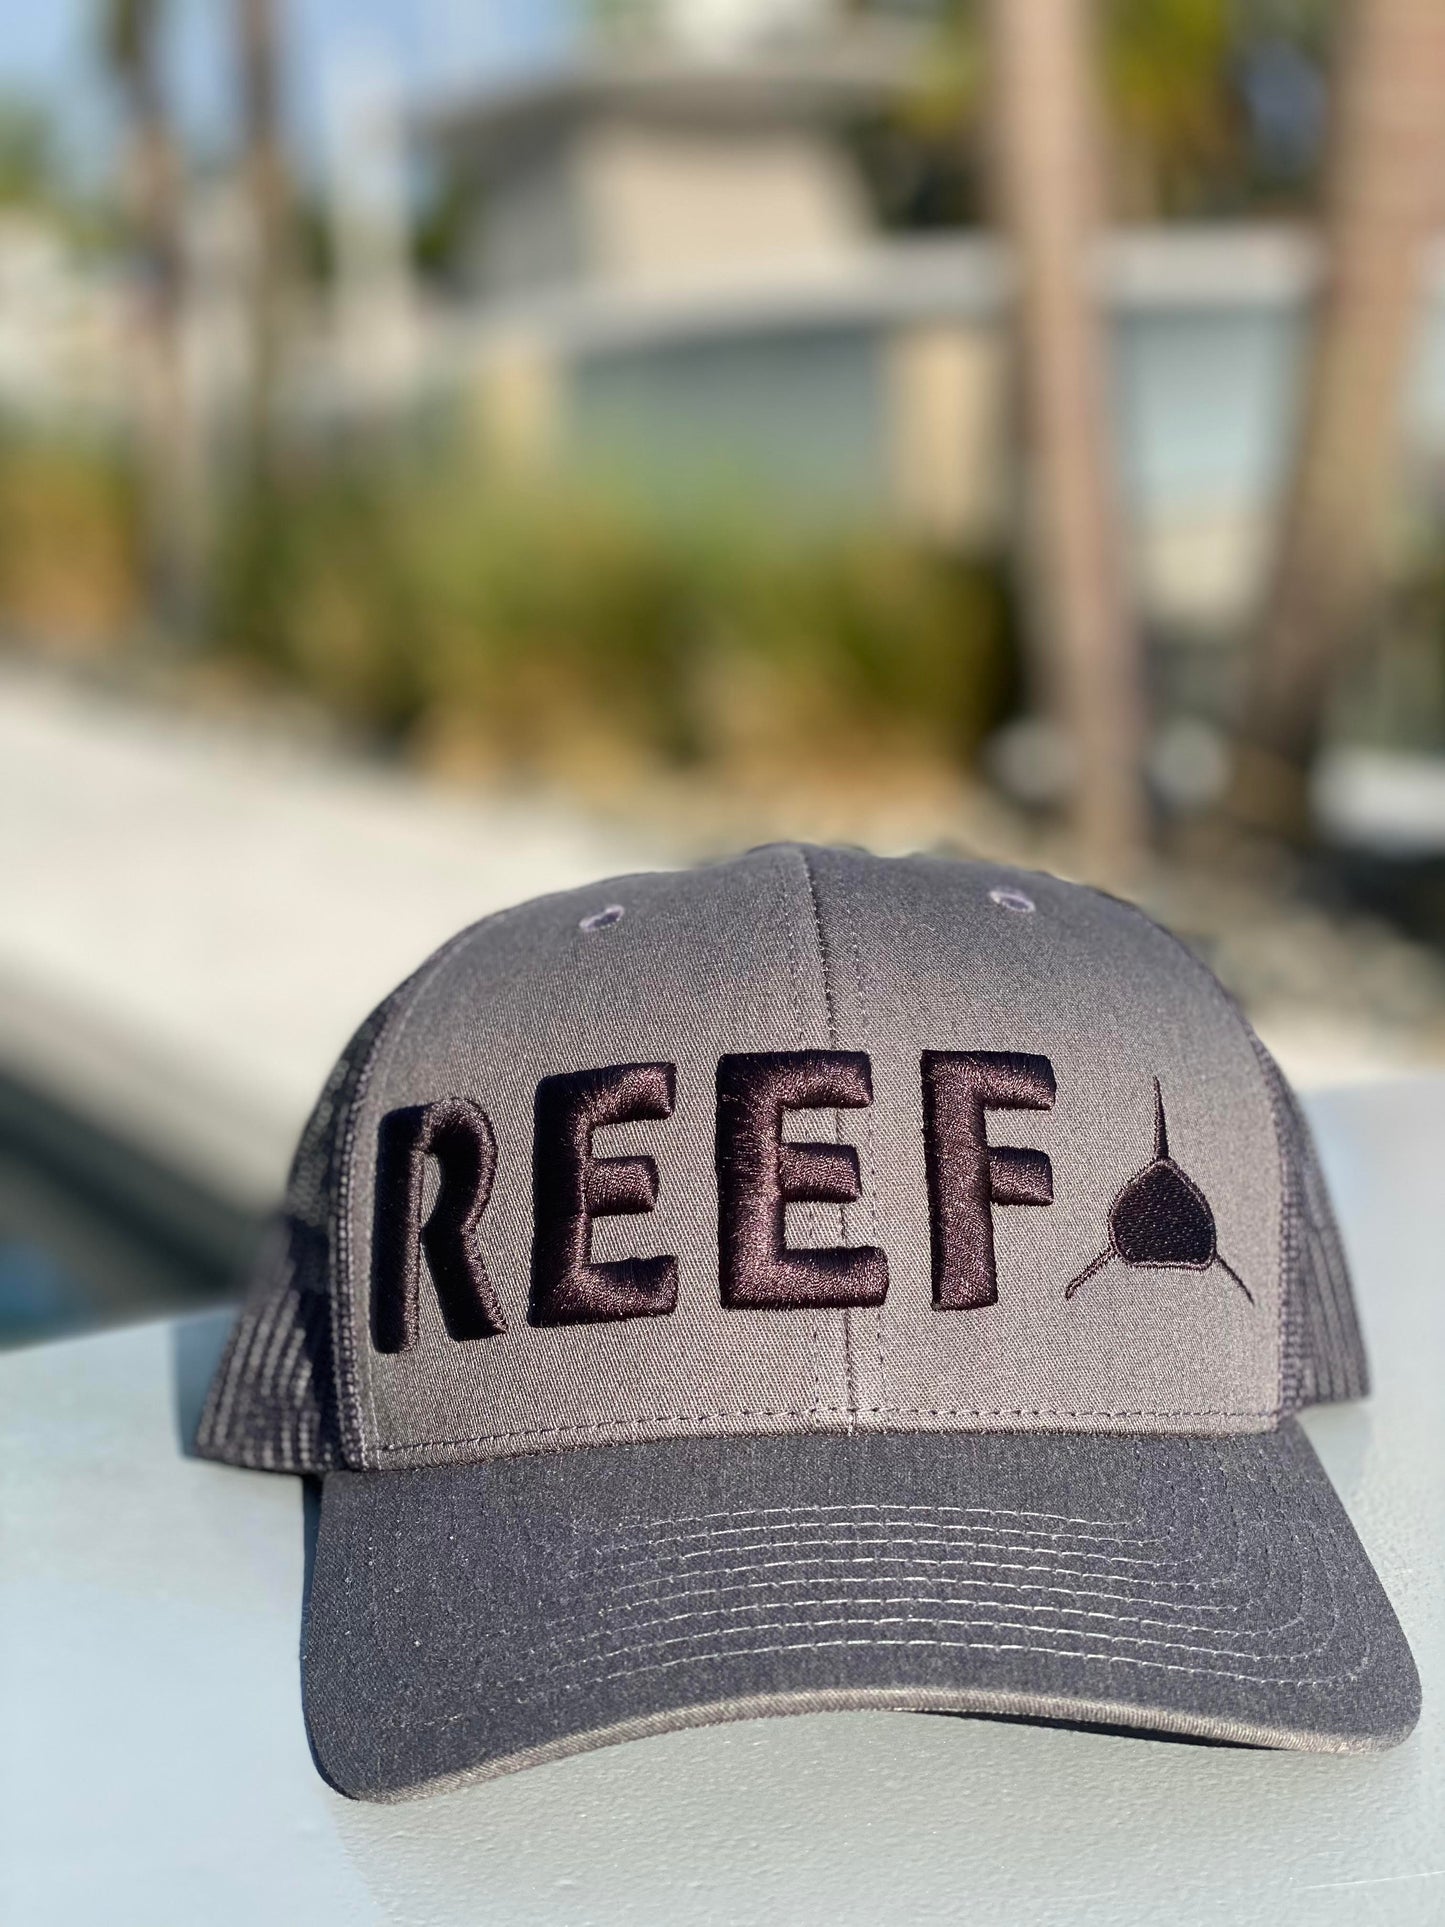 3d REEF Hat (Shark Week Limited Edition)